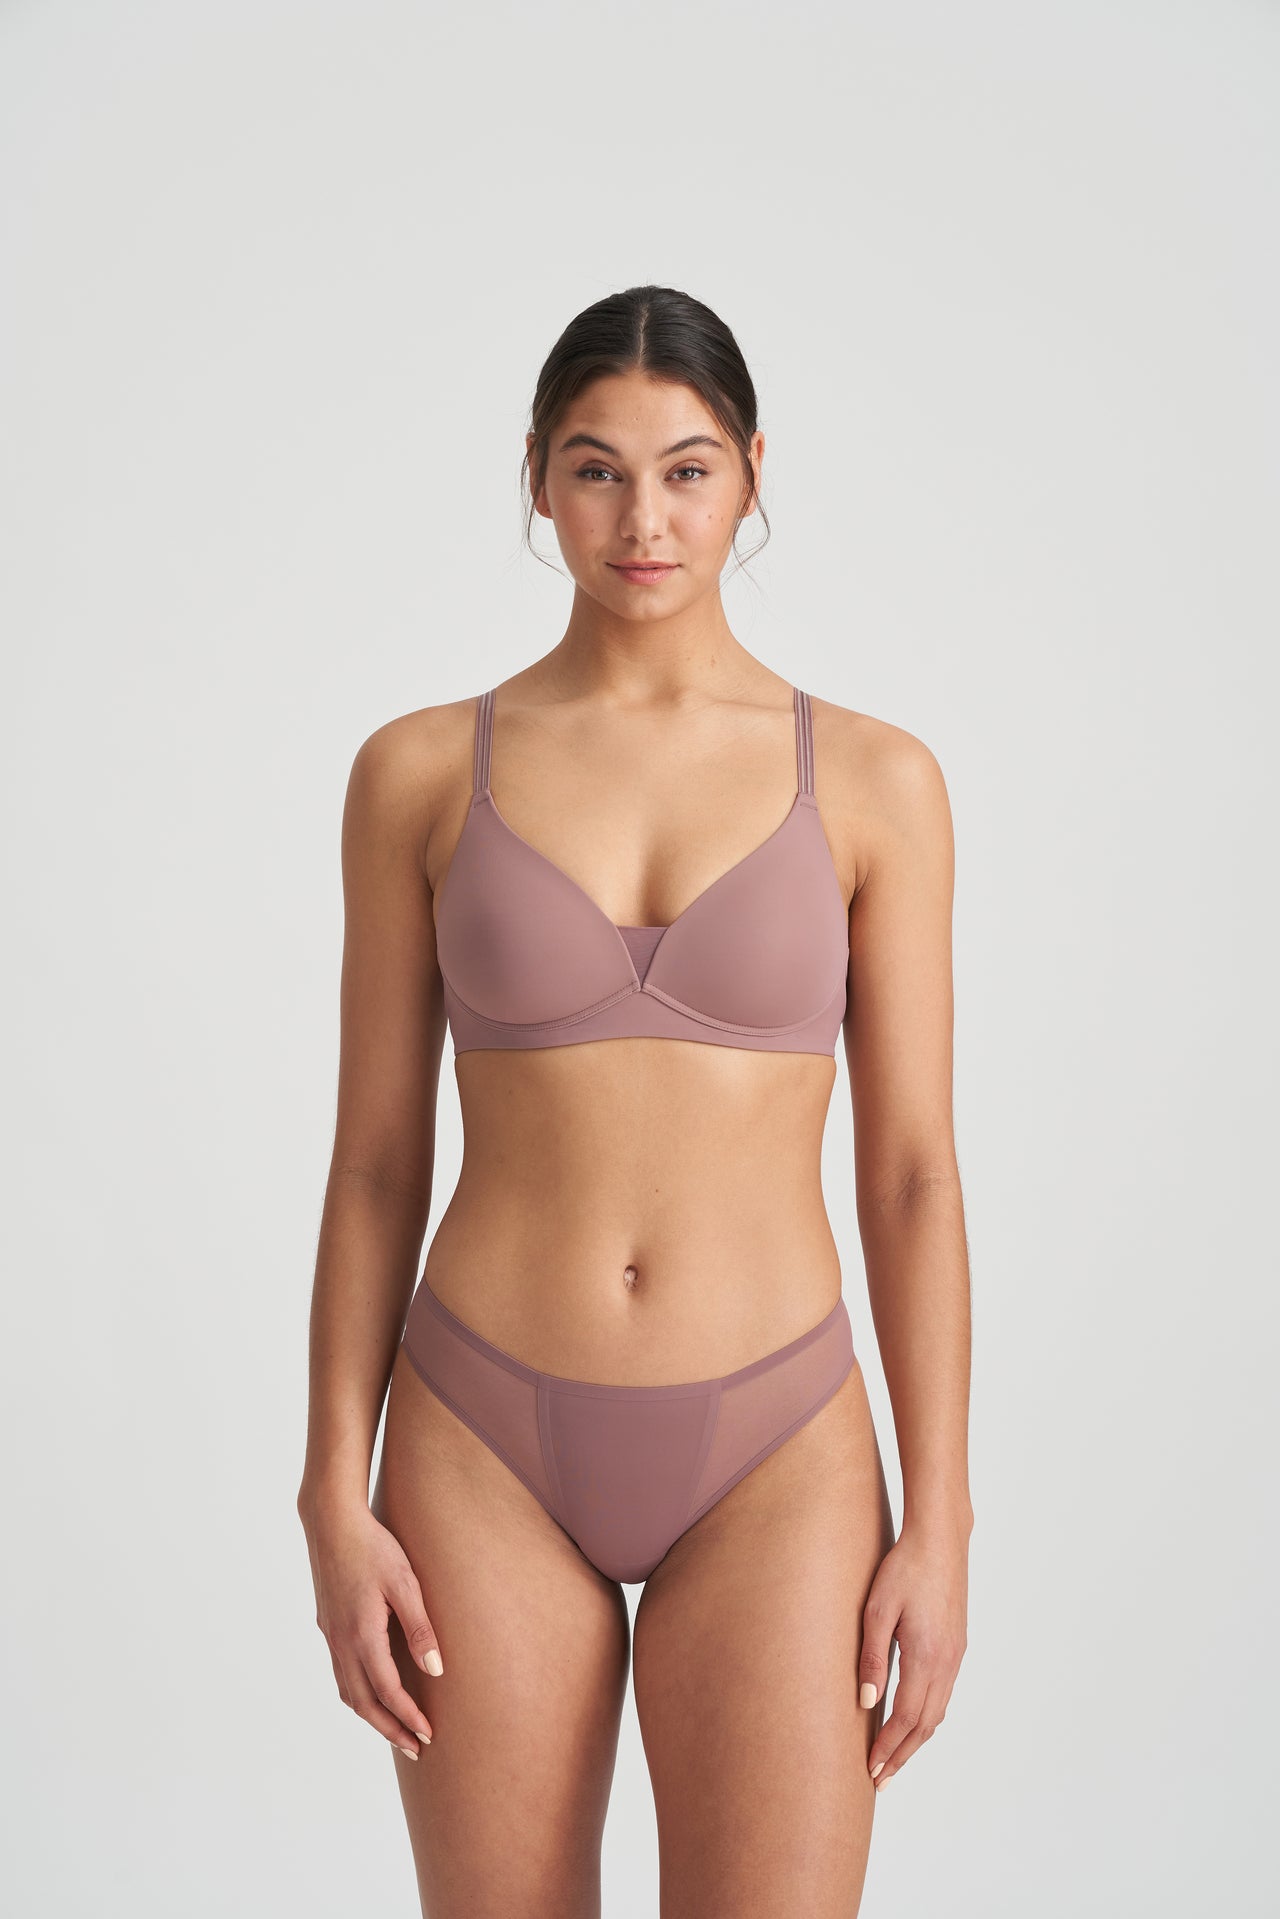 Louie Satin Taupe Full Cup Bra Wireless